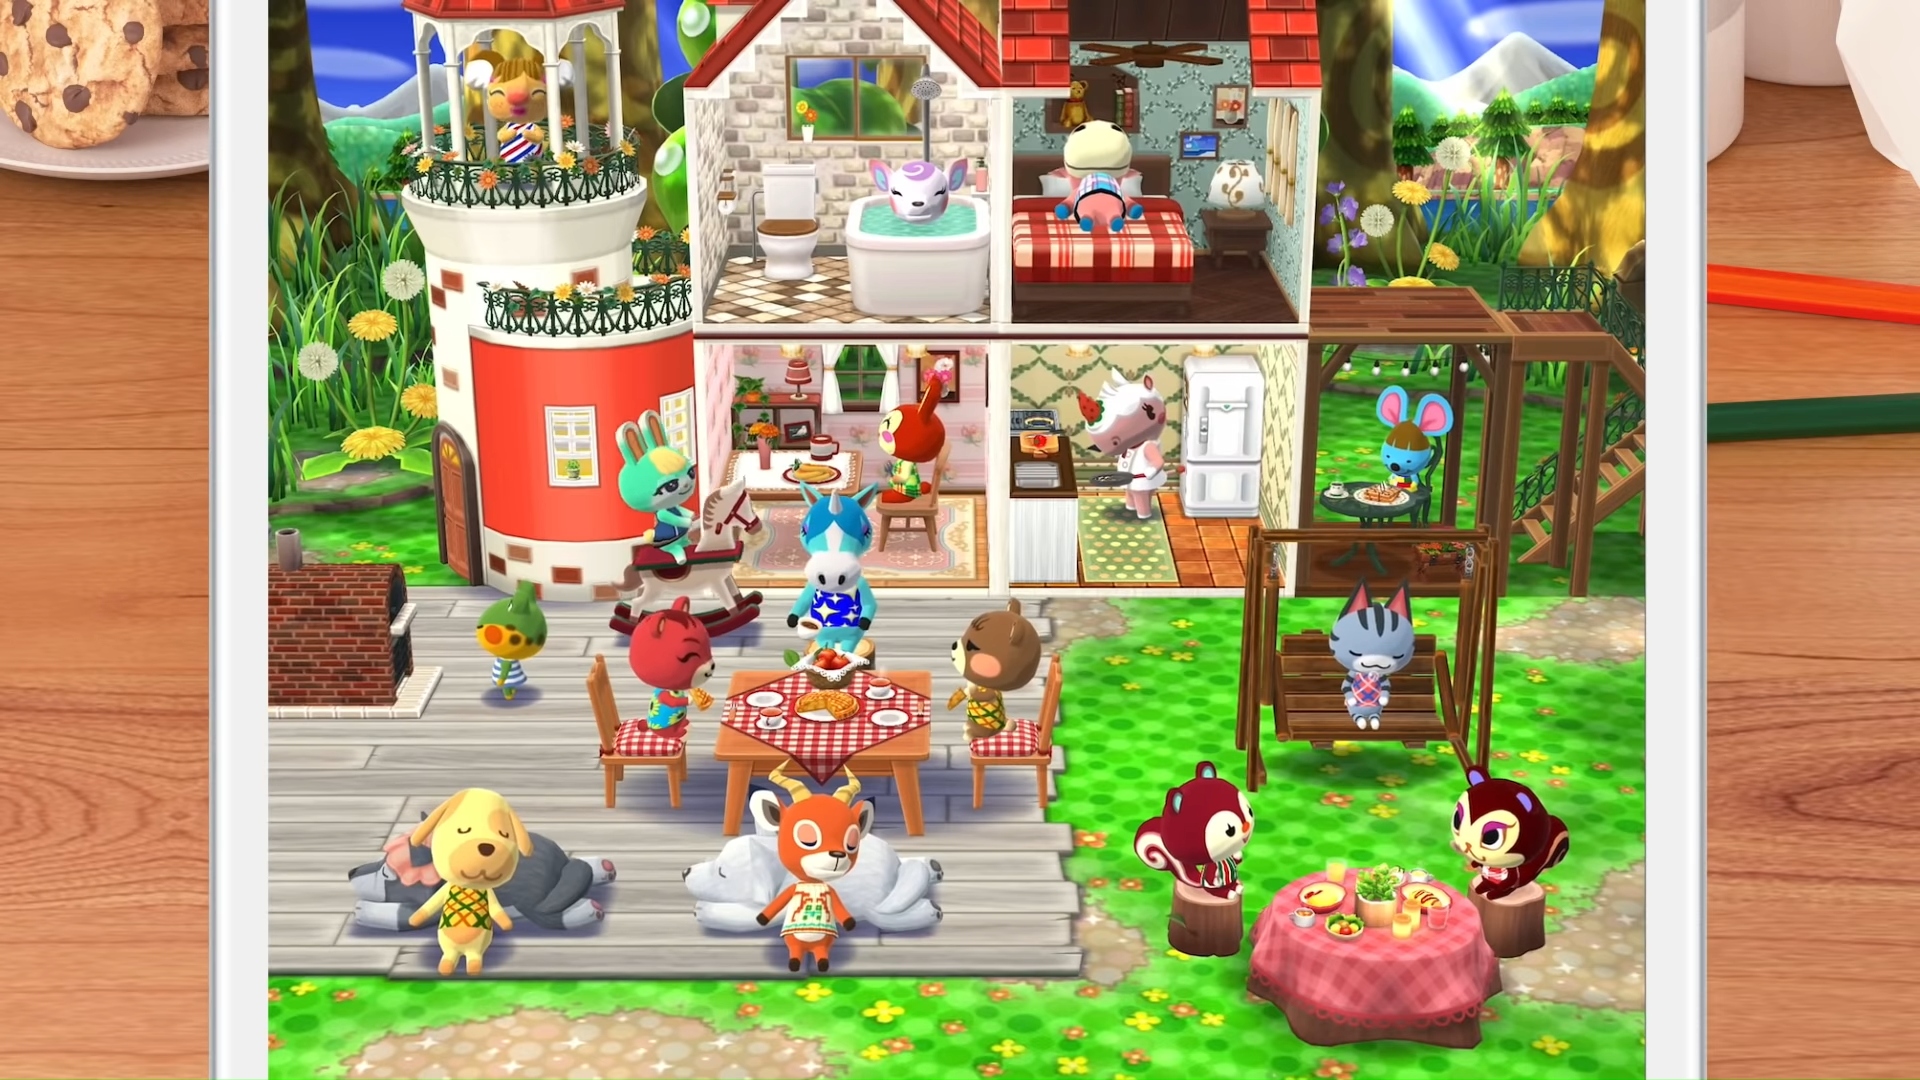 Addictive games - Animal Crossing: Pocket Camp. Image shows a camp filled with buildings and animal villagers.